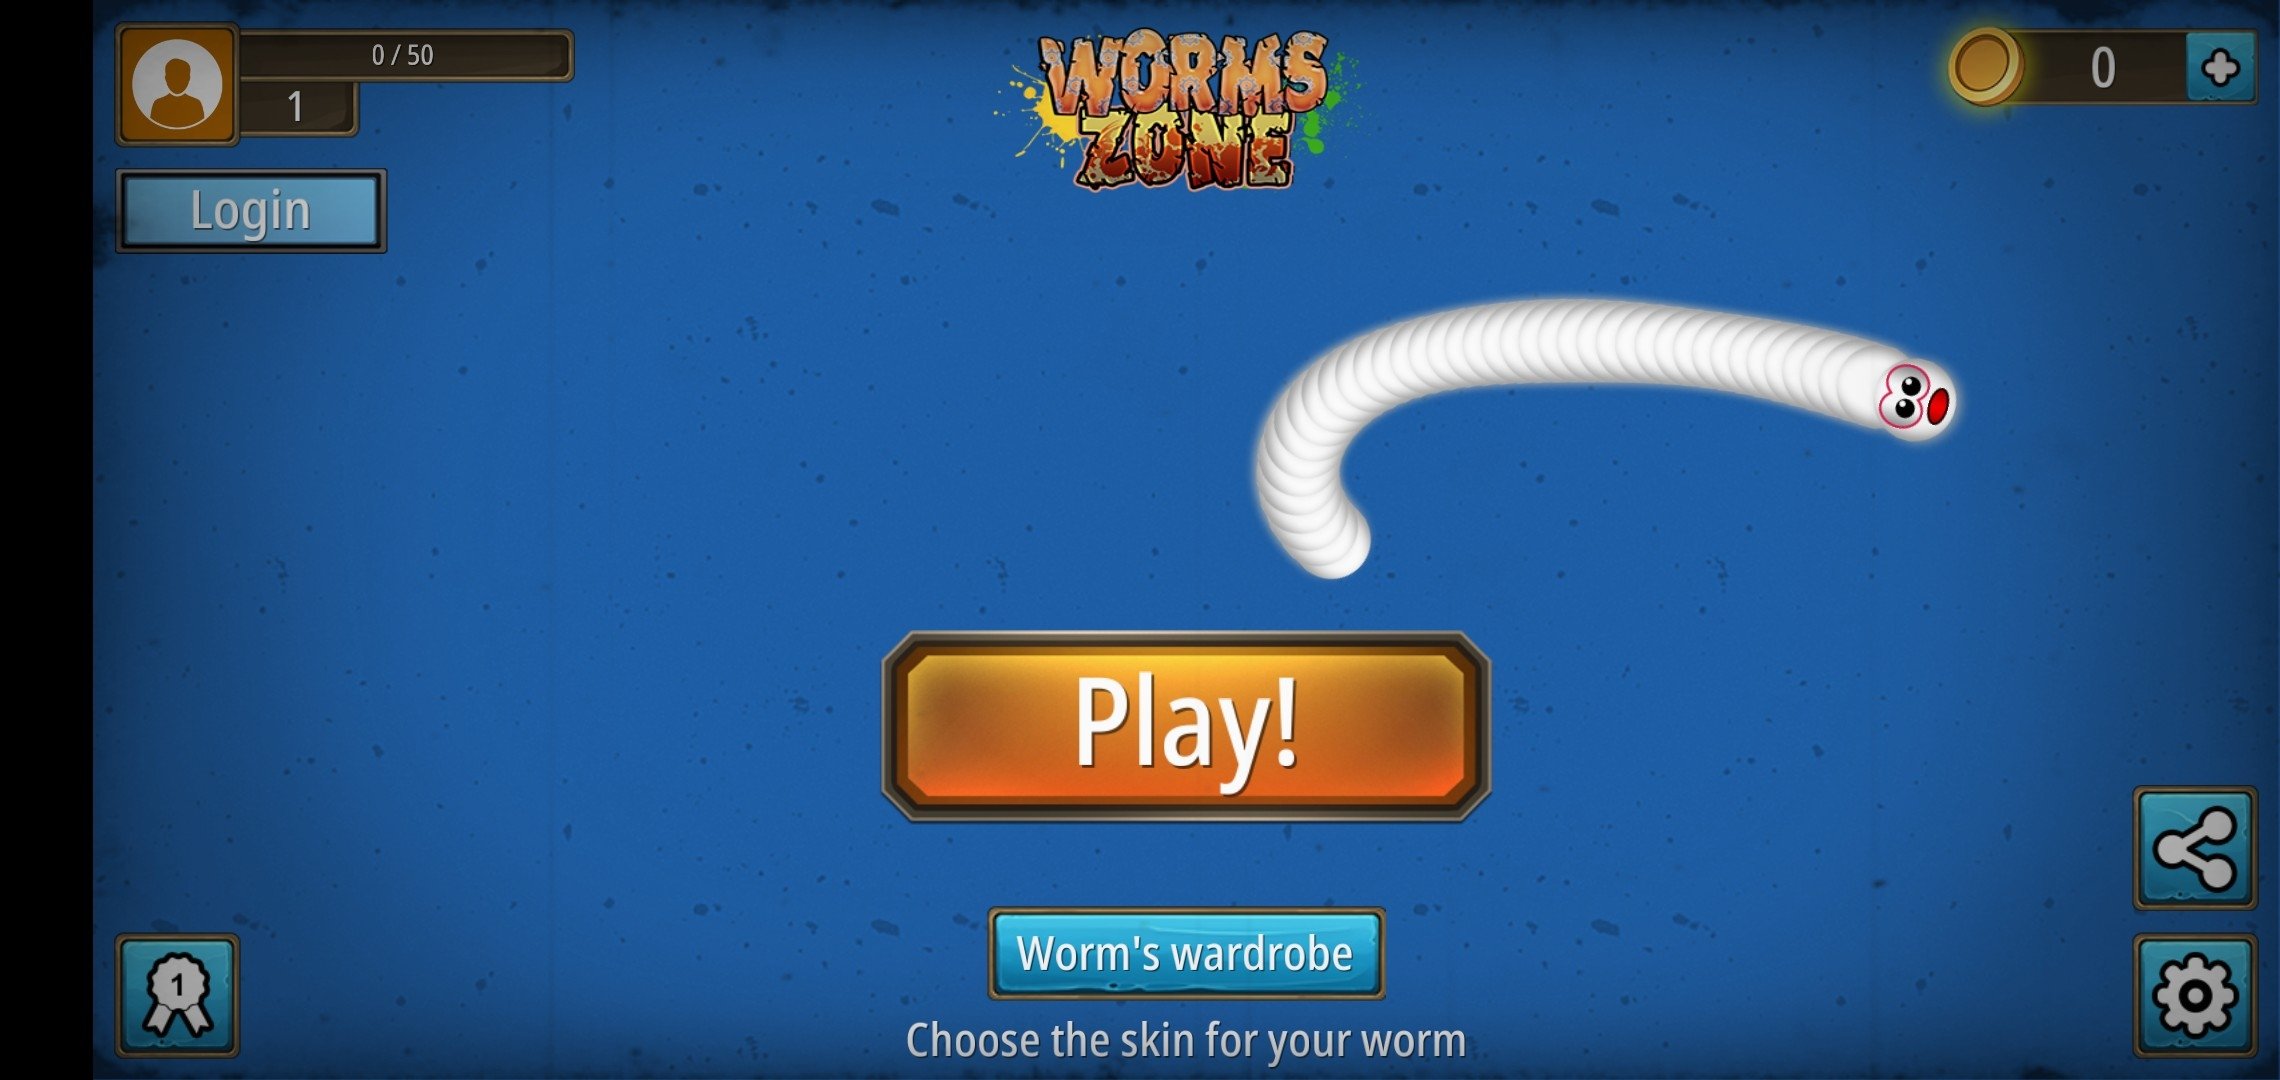 worms zone io game online